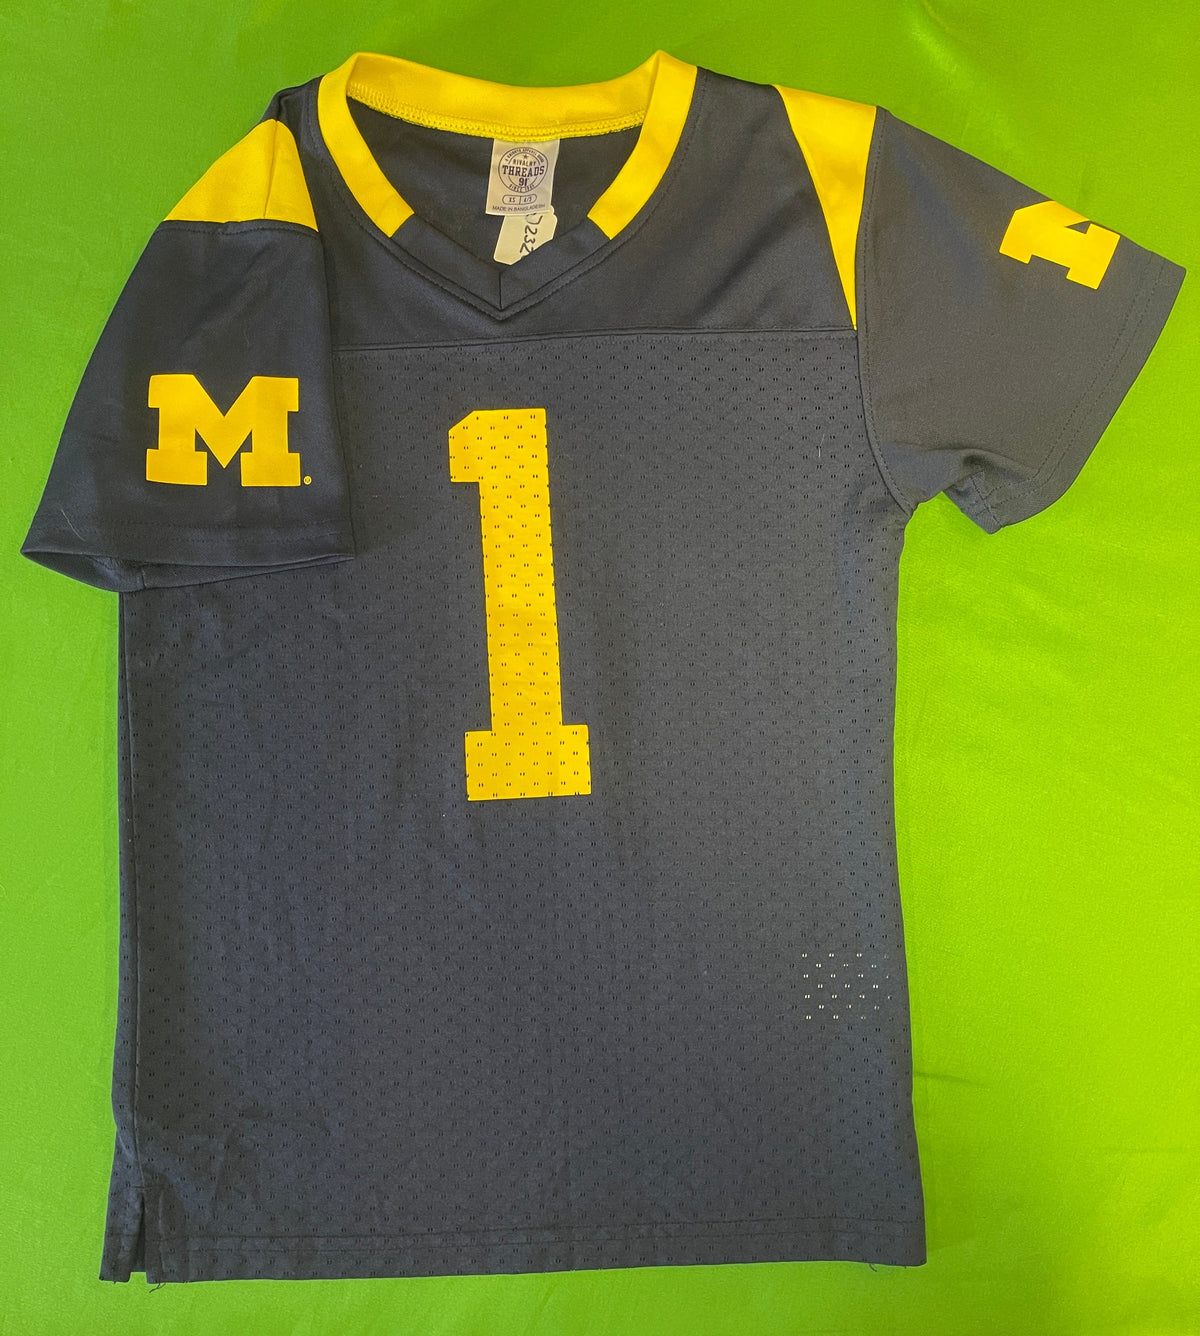 NCAA Michigan Wolverines #1 Blue Jersey Youth X-Small 4-5